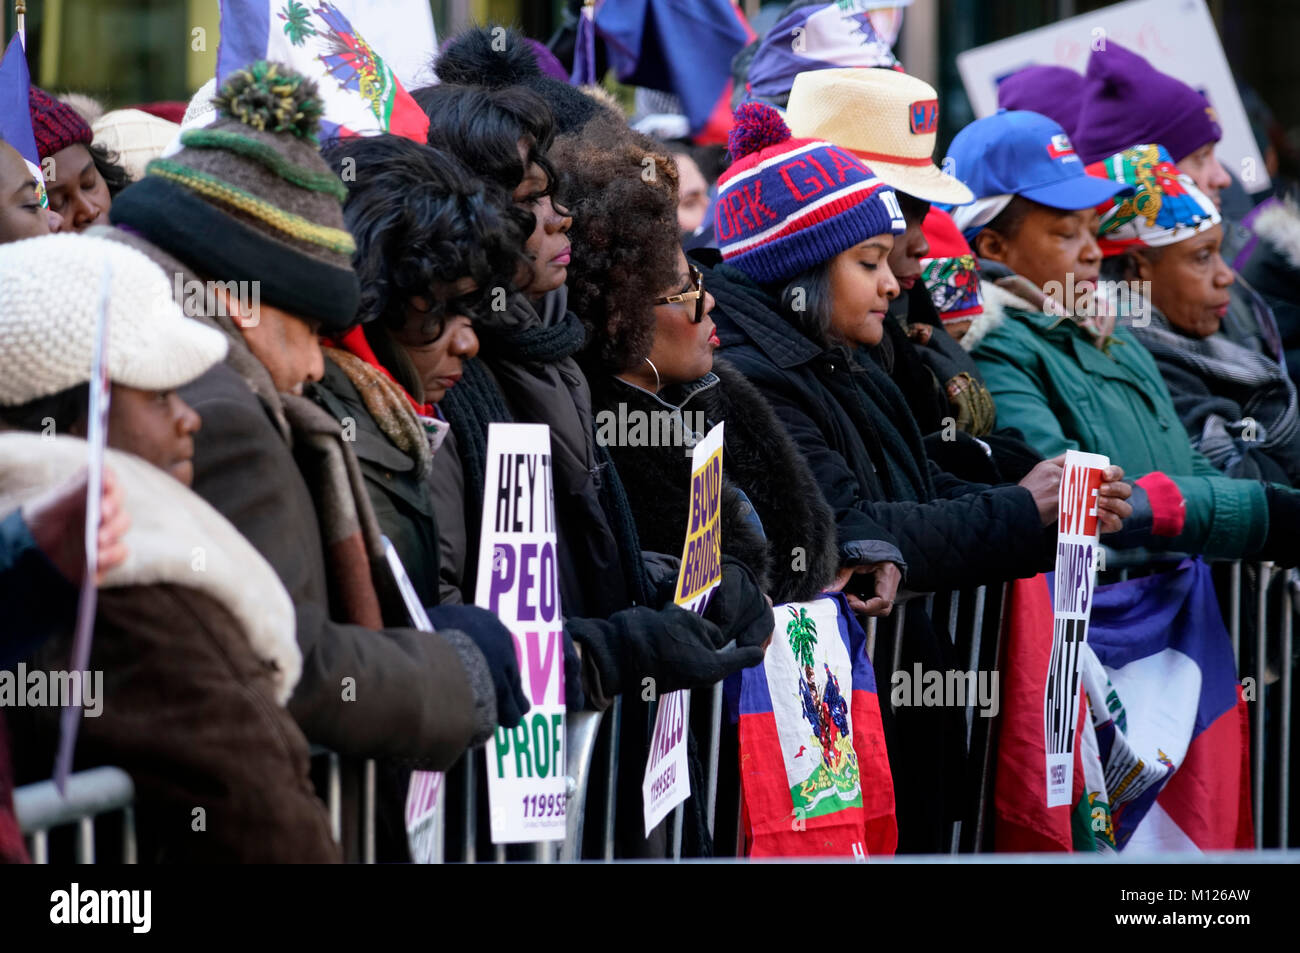 Protestors gather in a rally against racism in opposition to President Trump’s disparaging comments about Haiti and African nations.New York City.USA Stock Photo